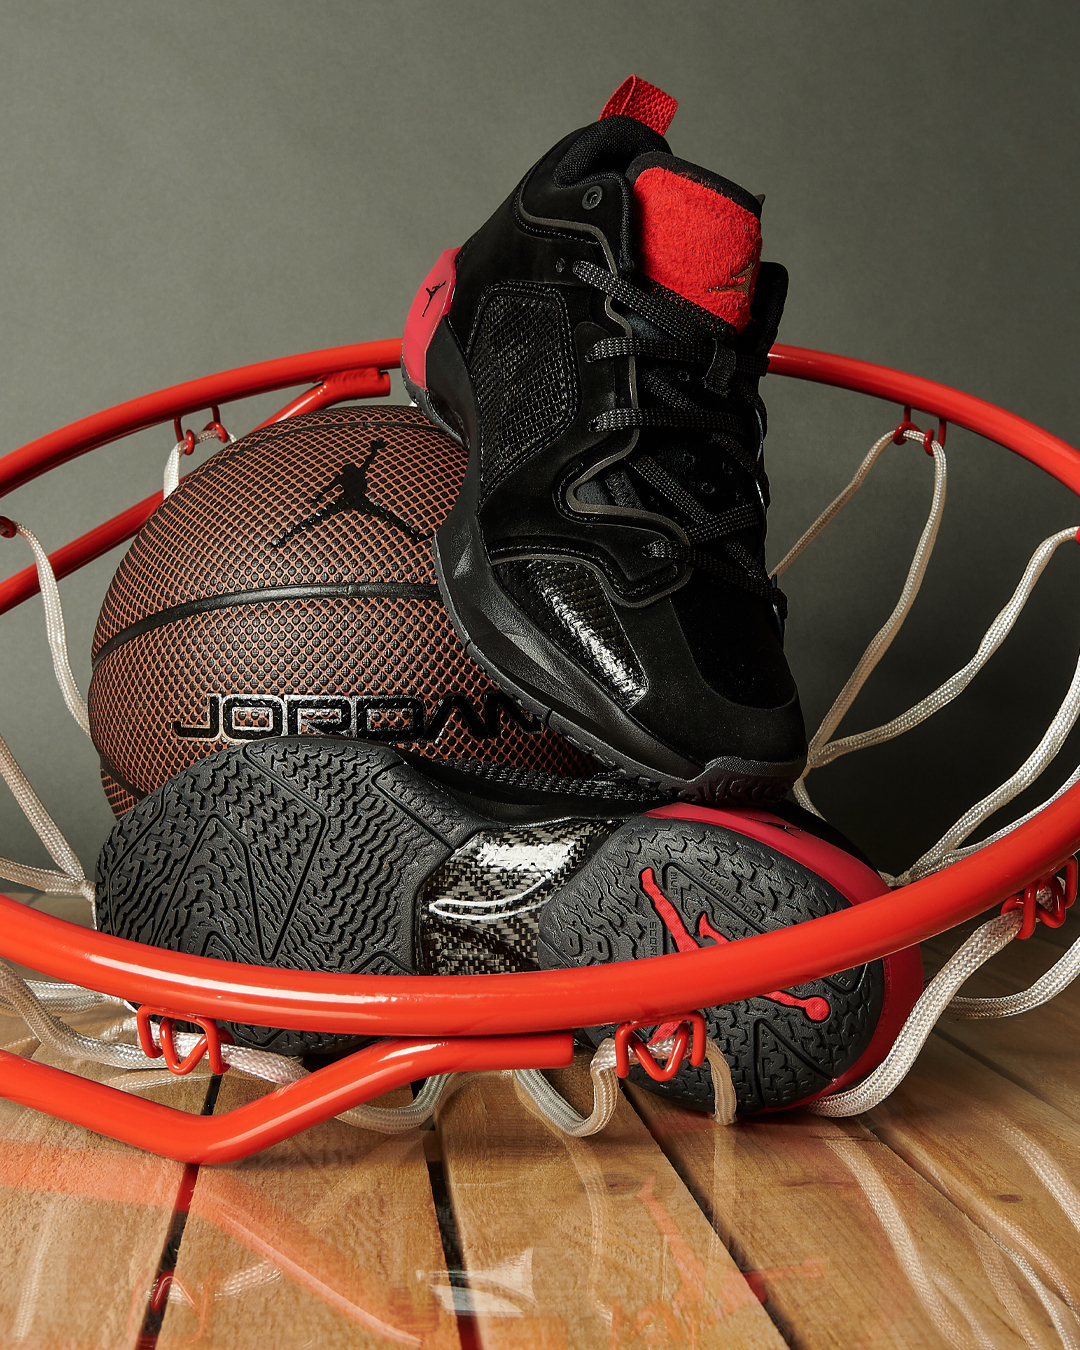 stylized image of a jordan basketball and black and red jordan sneakers in a basketball net placed on a wooden floor